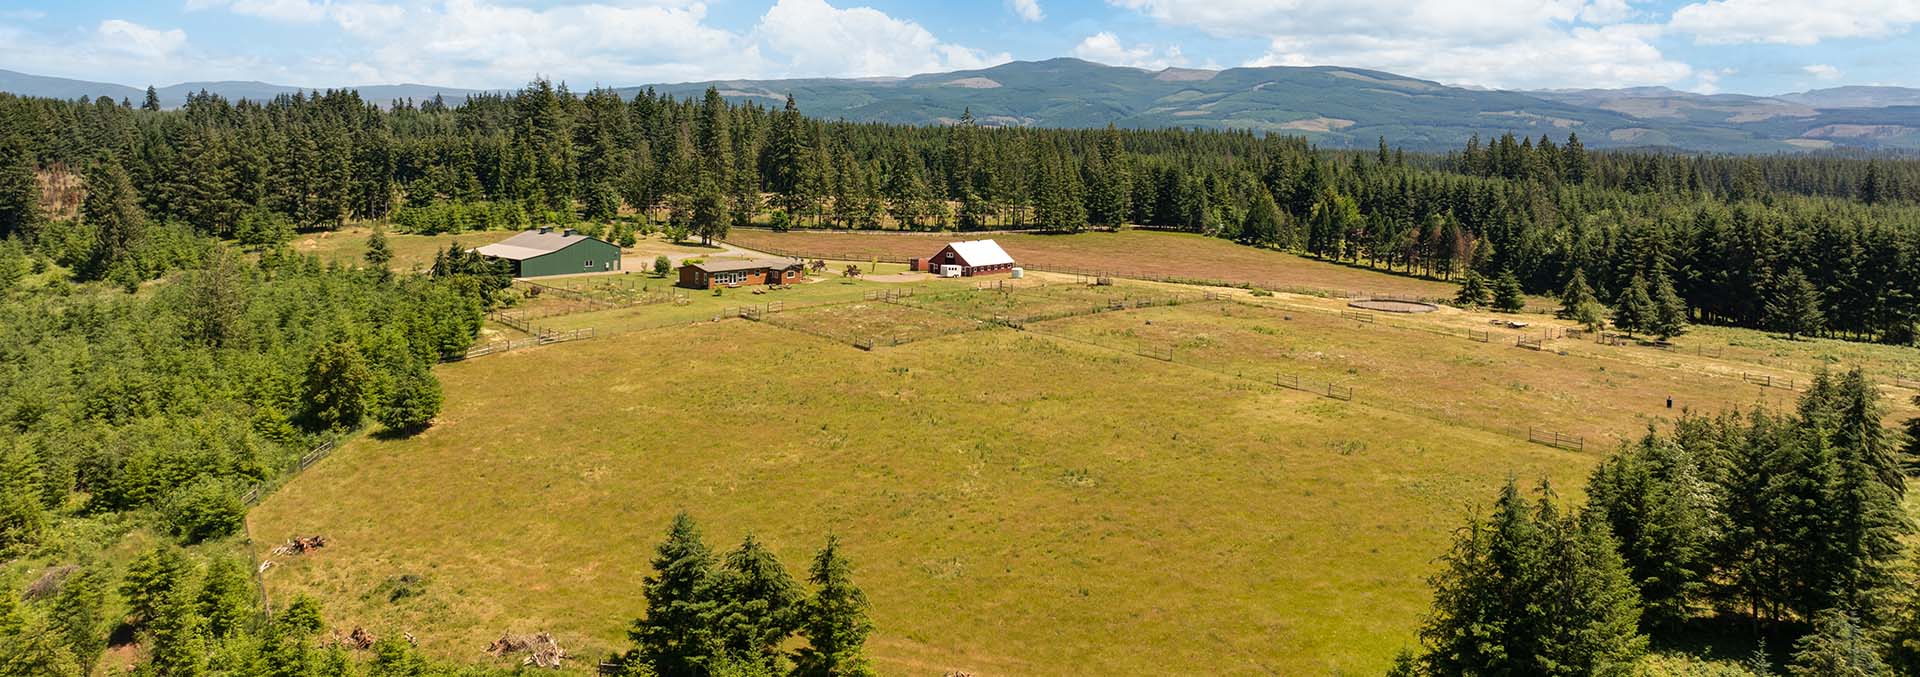 oregon ranches for sale randall creek ranch